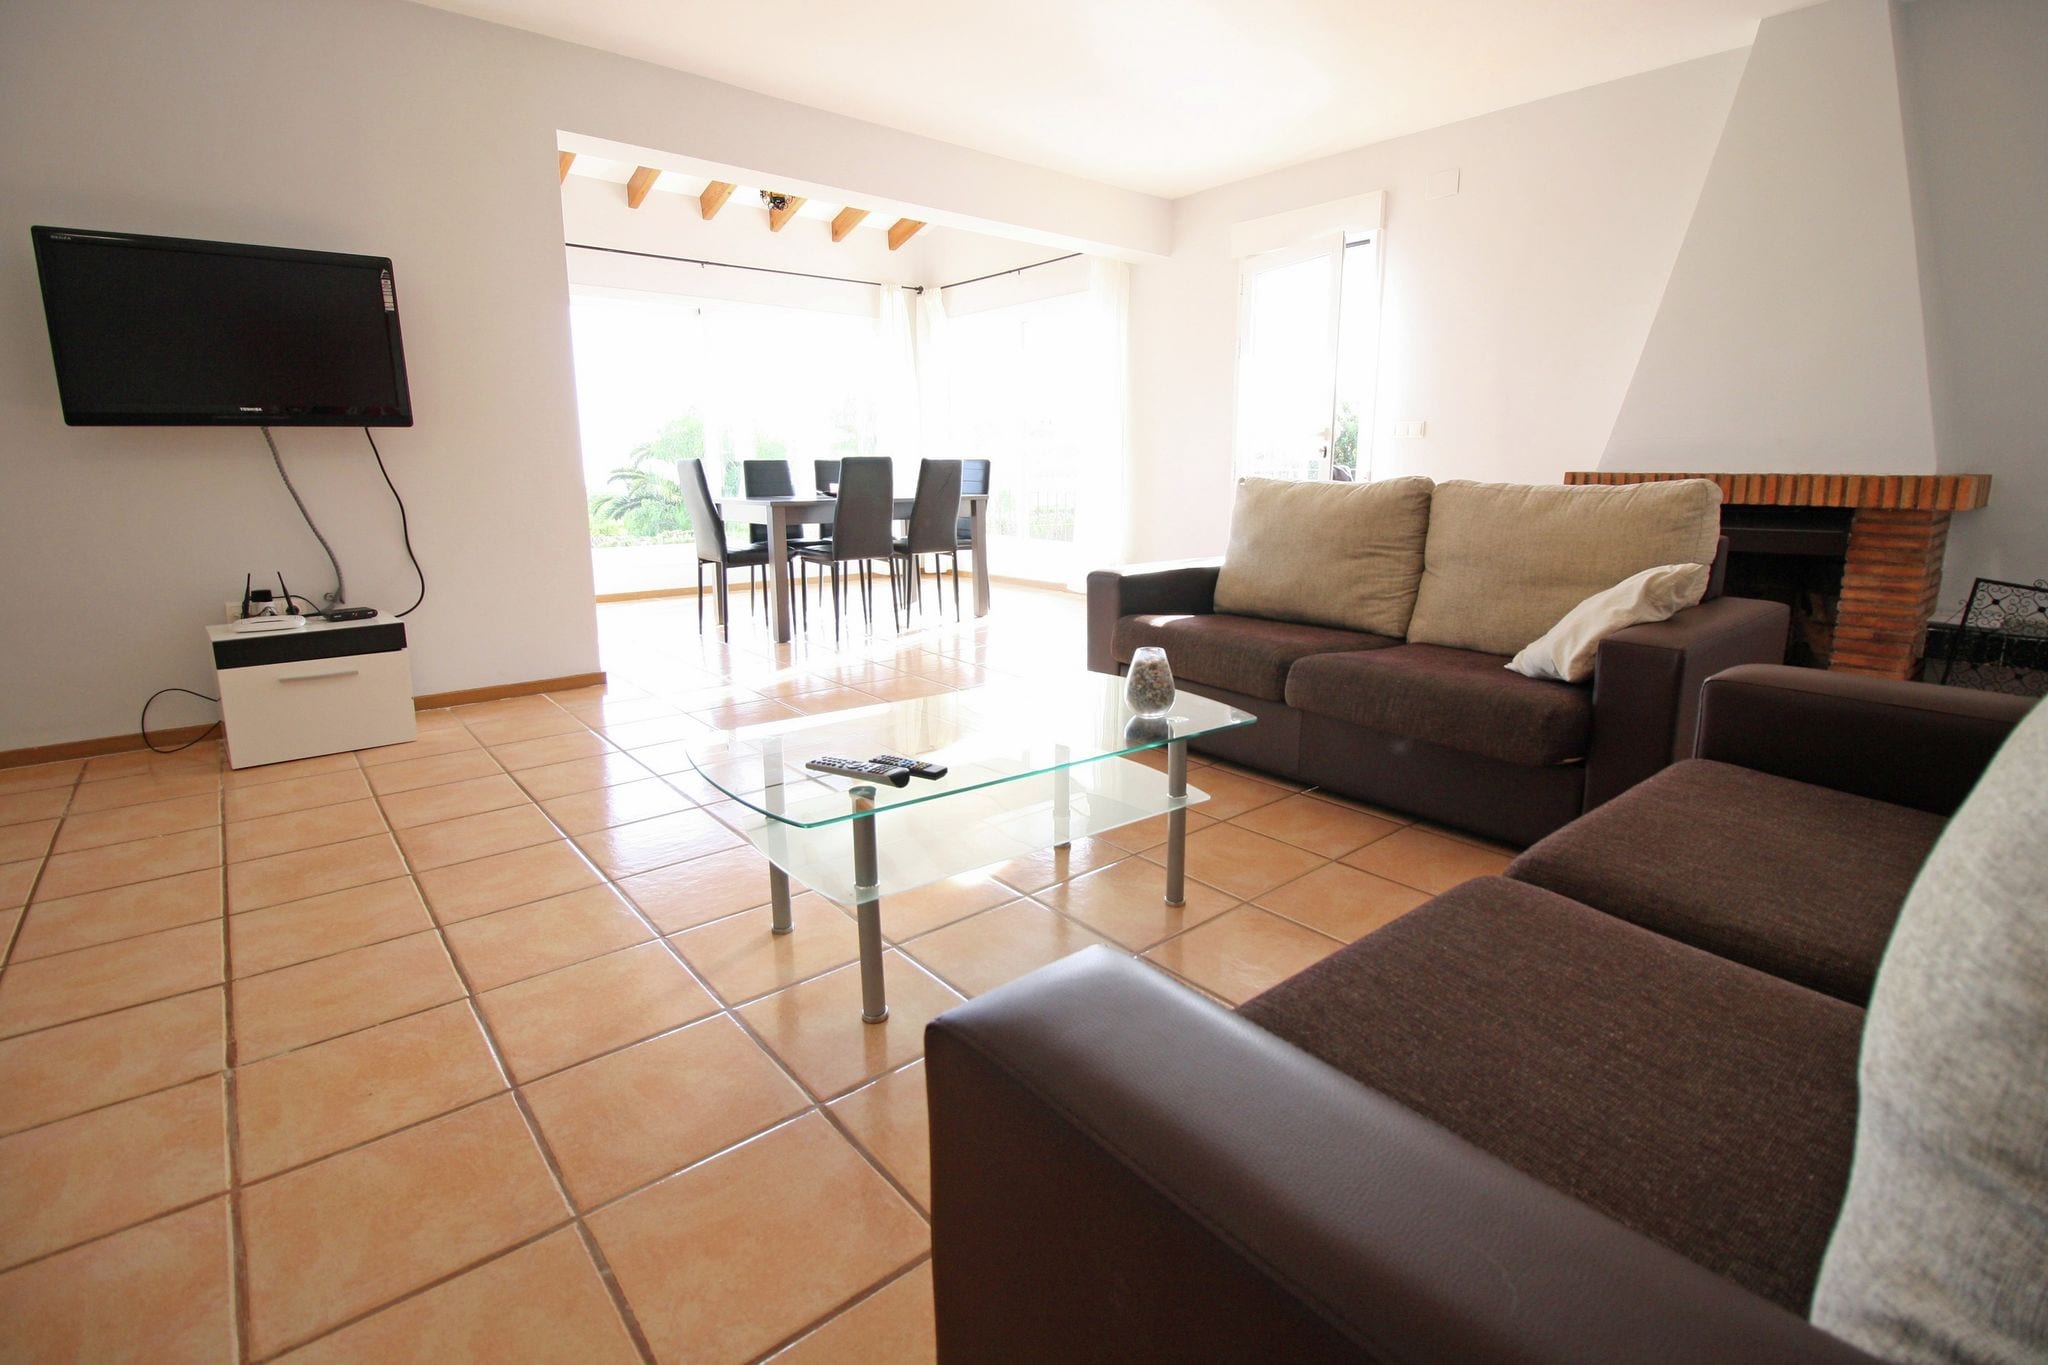 Fancy Holiday Home by the Sea in Calpe with Pool